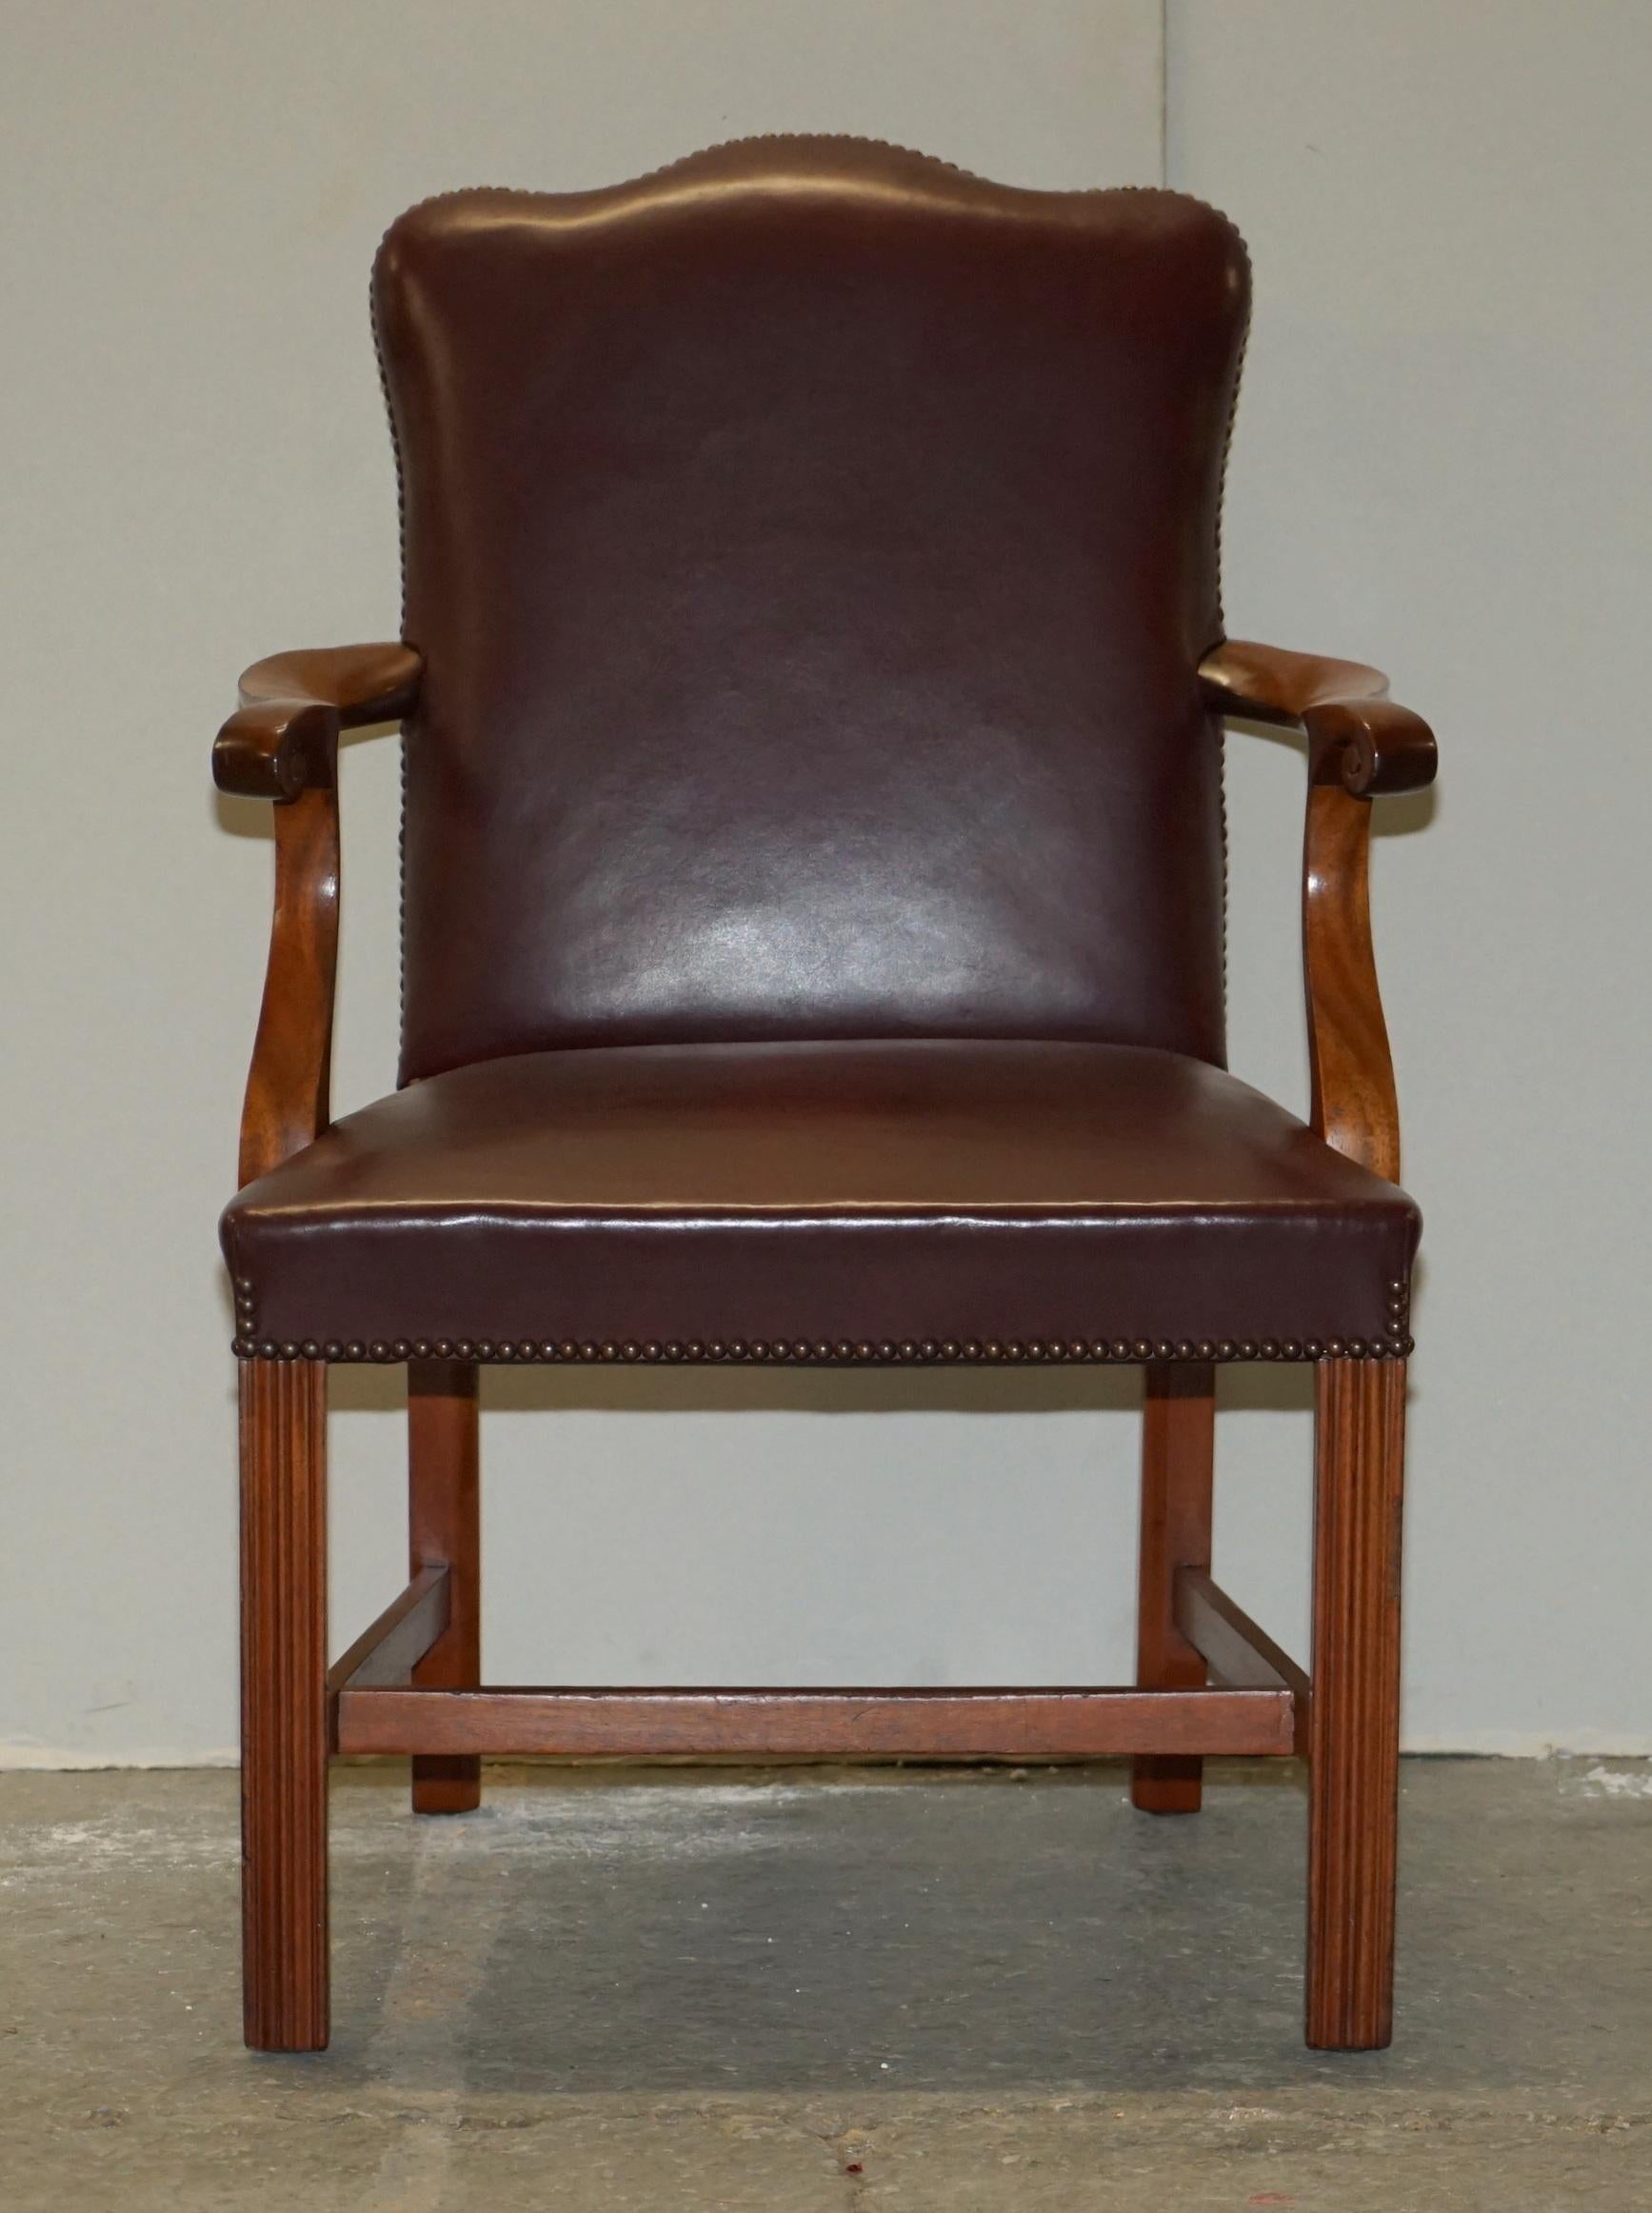 LEATHER CARVER OFFICE CHAIR FROM PRINCESS DIANA'S FAMILY ESTATE SPENCER HOUSE (Englisch) im Angebot